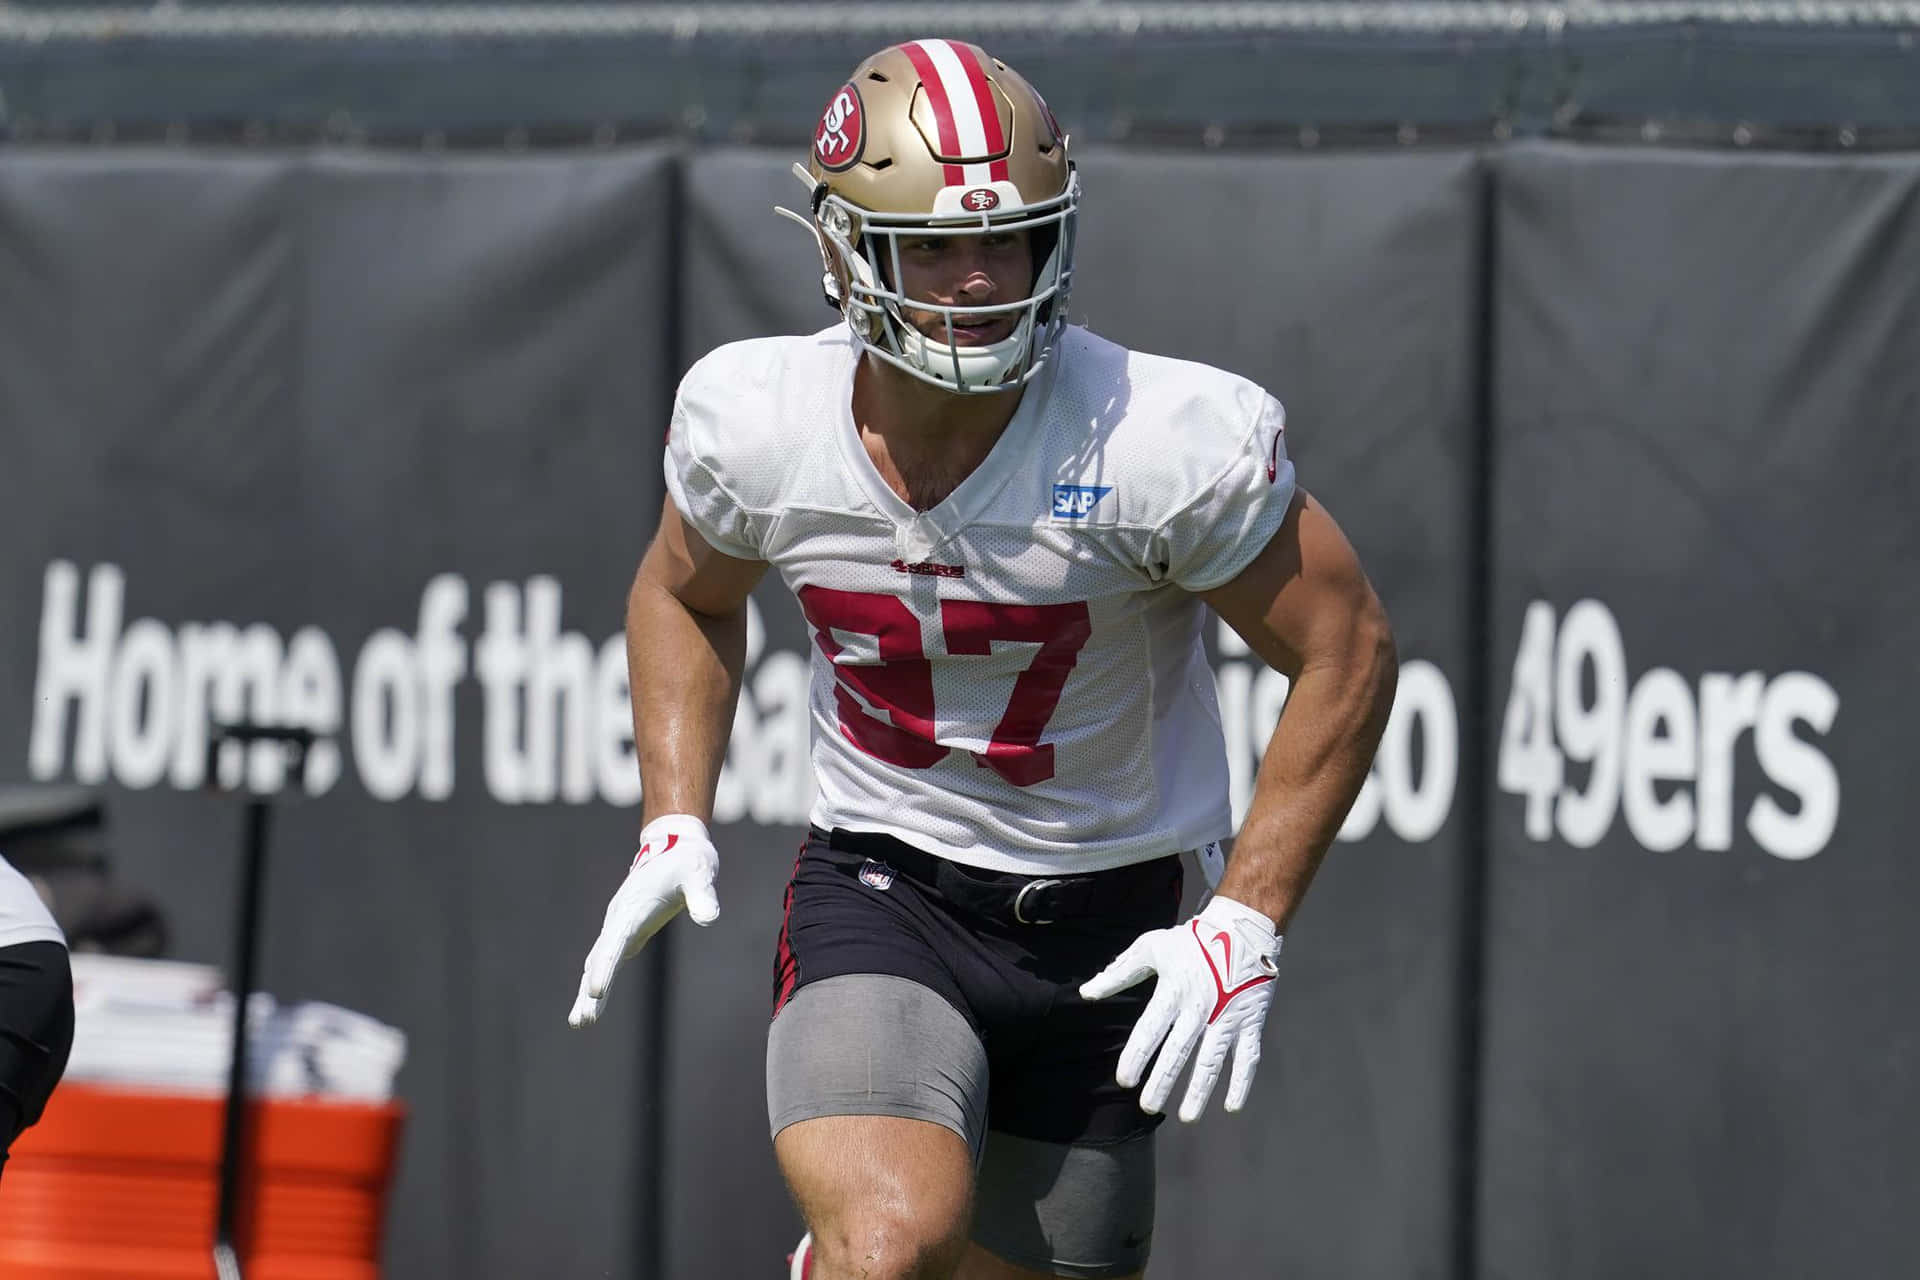 Nick Bosa takes the field with the San Francisco 49ers Wallpaper